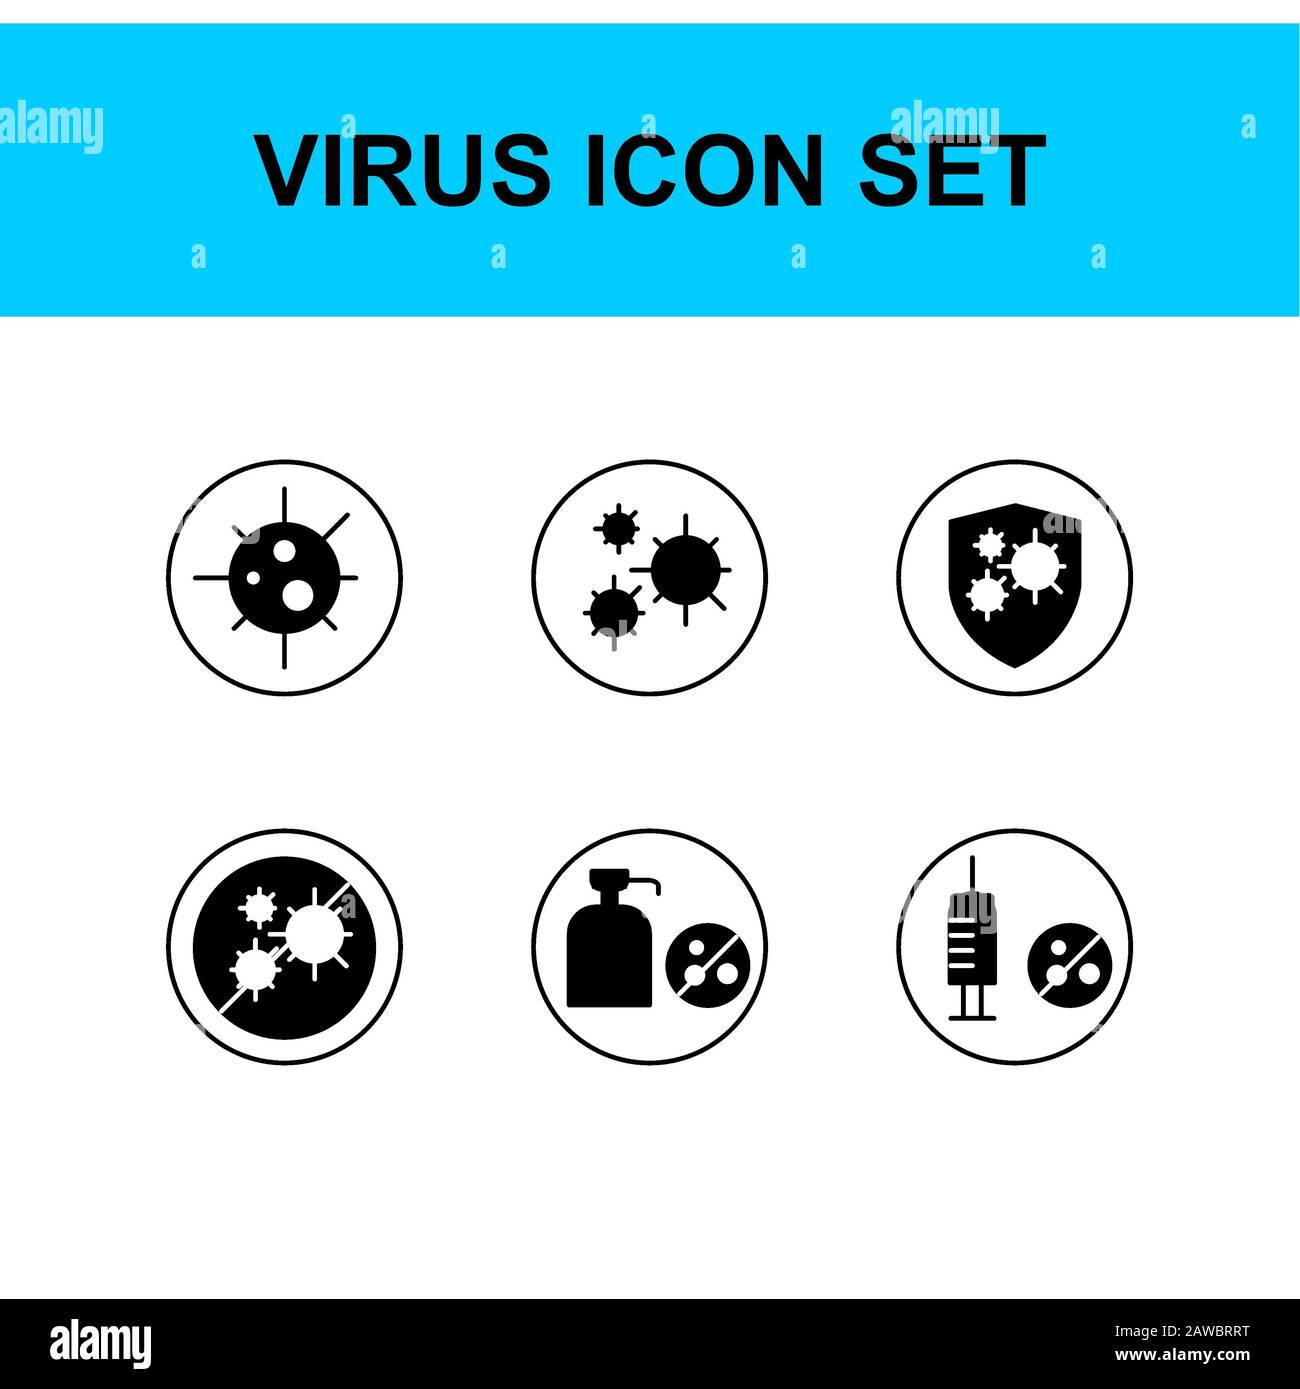 virus icon set. glyph style.Flu, fever,cold, Virus, corona, lung, wash, hand, bottle, tablet, vaccine, bed, rest, anti-virus, spread. editable icon. Stock Photo